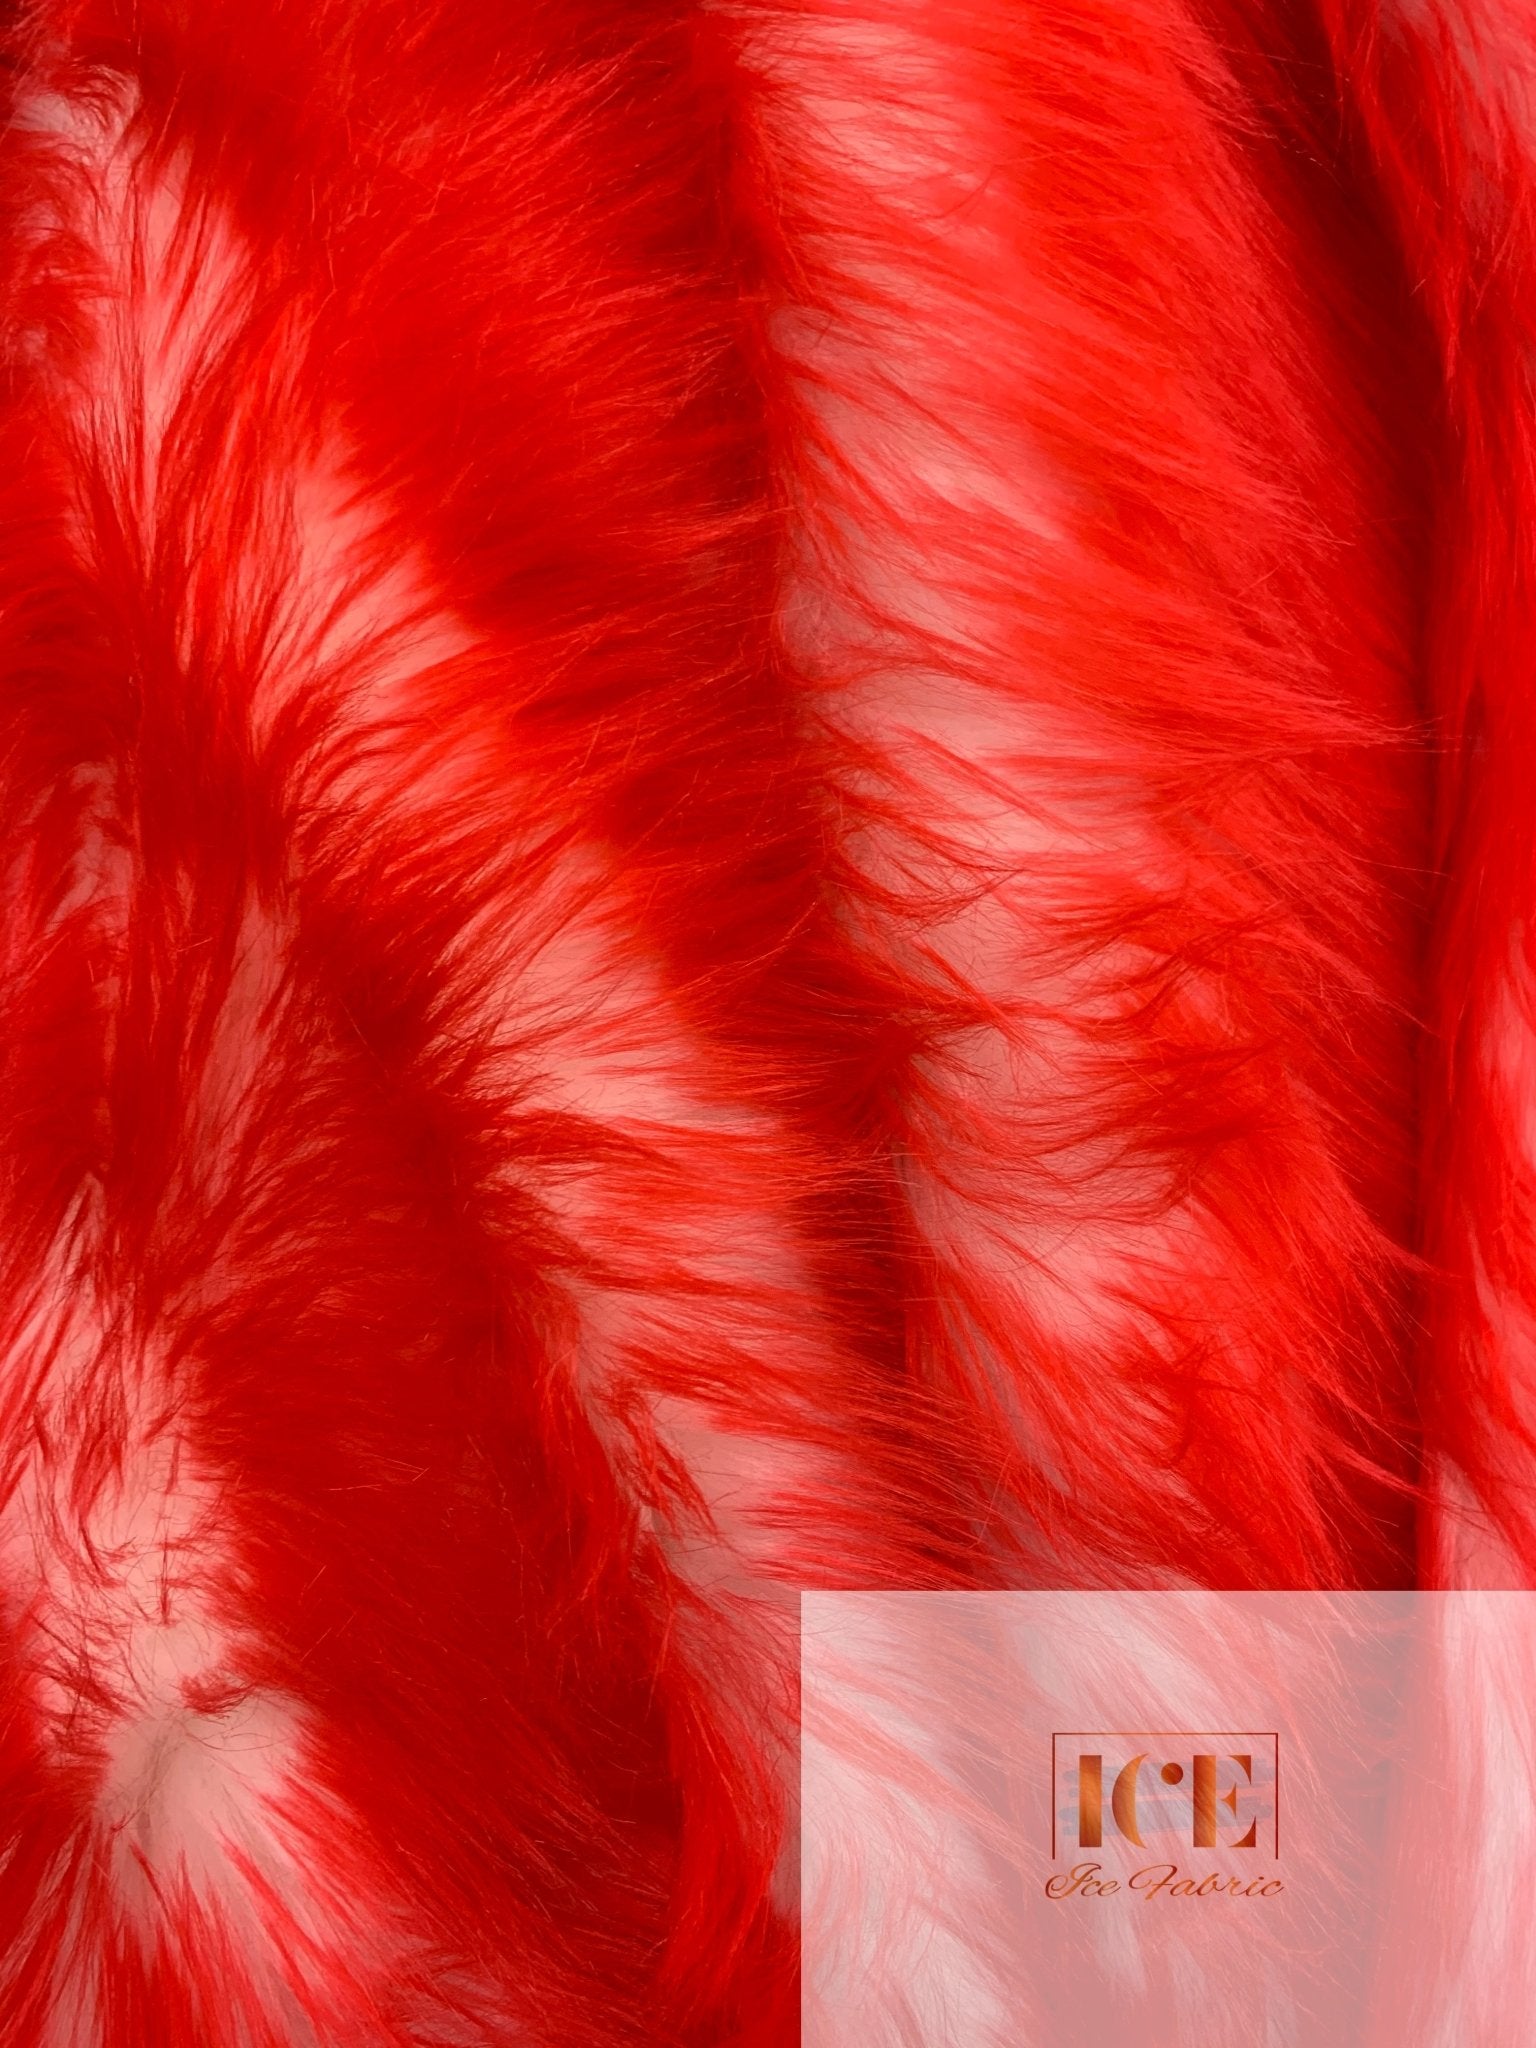 Canadian Fox 2 Tone Shaggy Long Pile Faux Fur Fabric For Blankets, Costumes, Bed SpreadICEFABRICICE FABRICSRed WhiteBy The Yard (60 inches Wide)Canadian Fox 2 Tone Shaggy Long Pile Faux Fur Fabric For Blankets, Costumes, Bed Spread ICEFABRIC Red